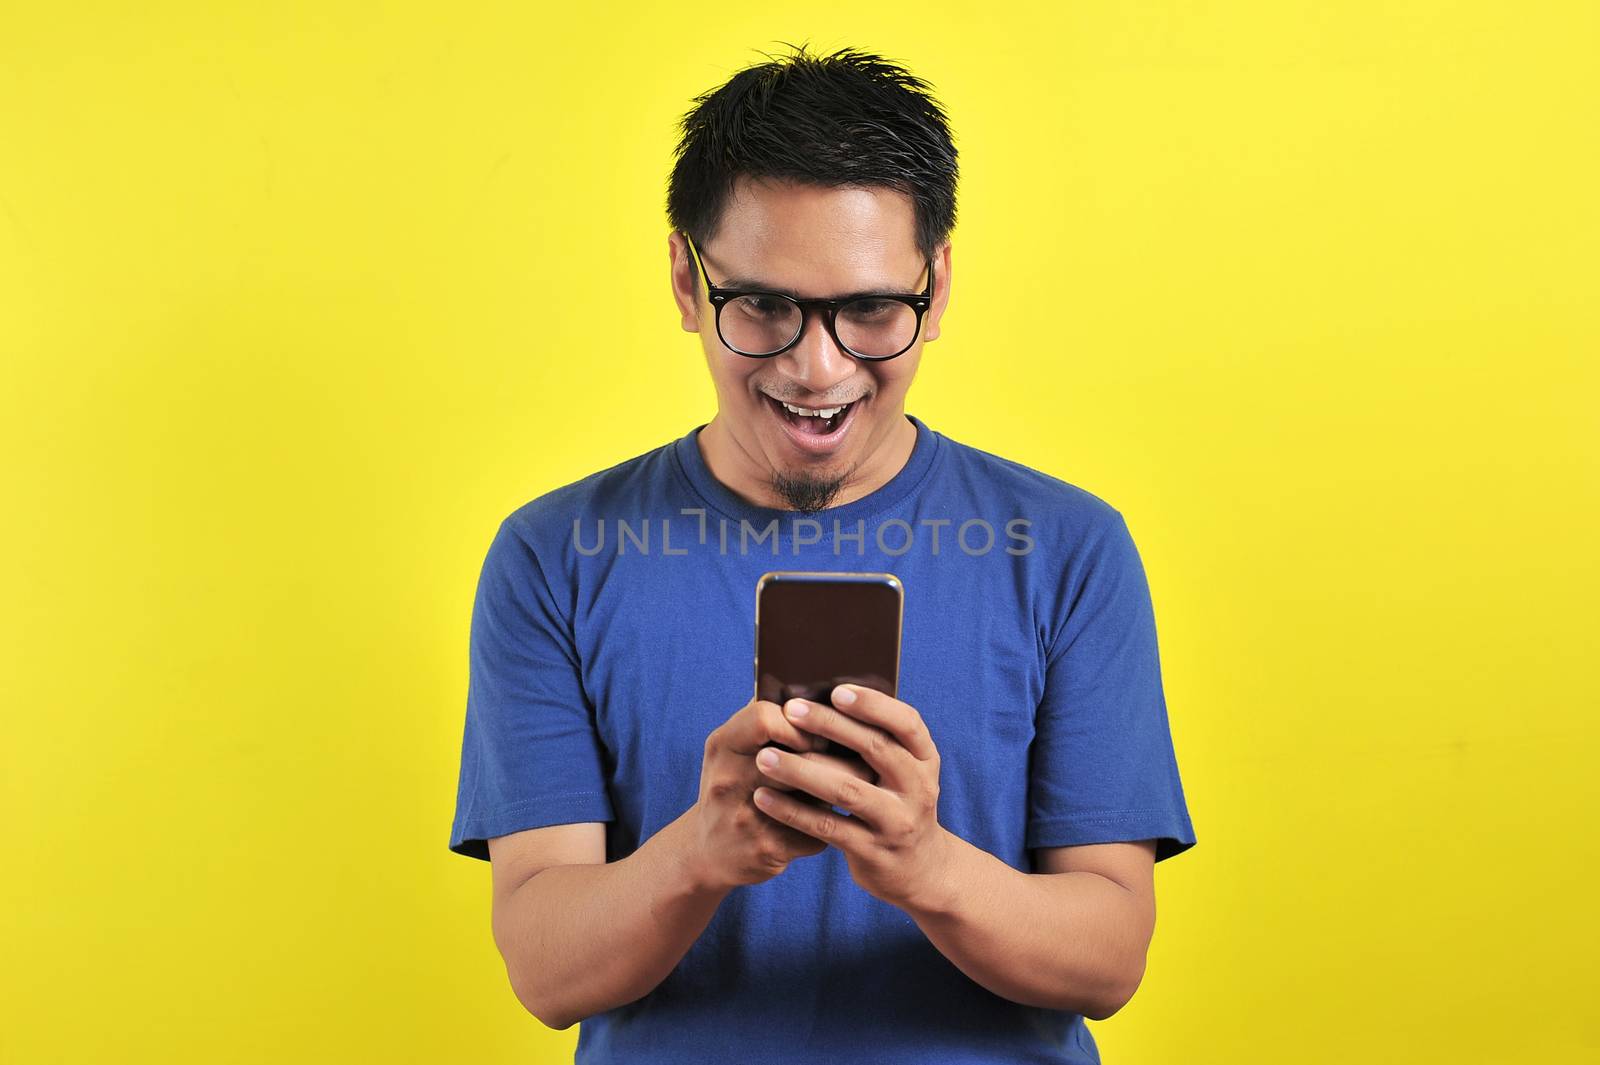 Shocked face of Asian man in blue shirt looking at phone screen on yellow background